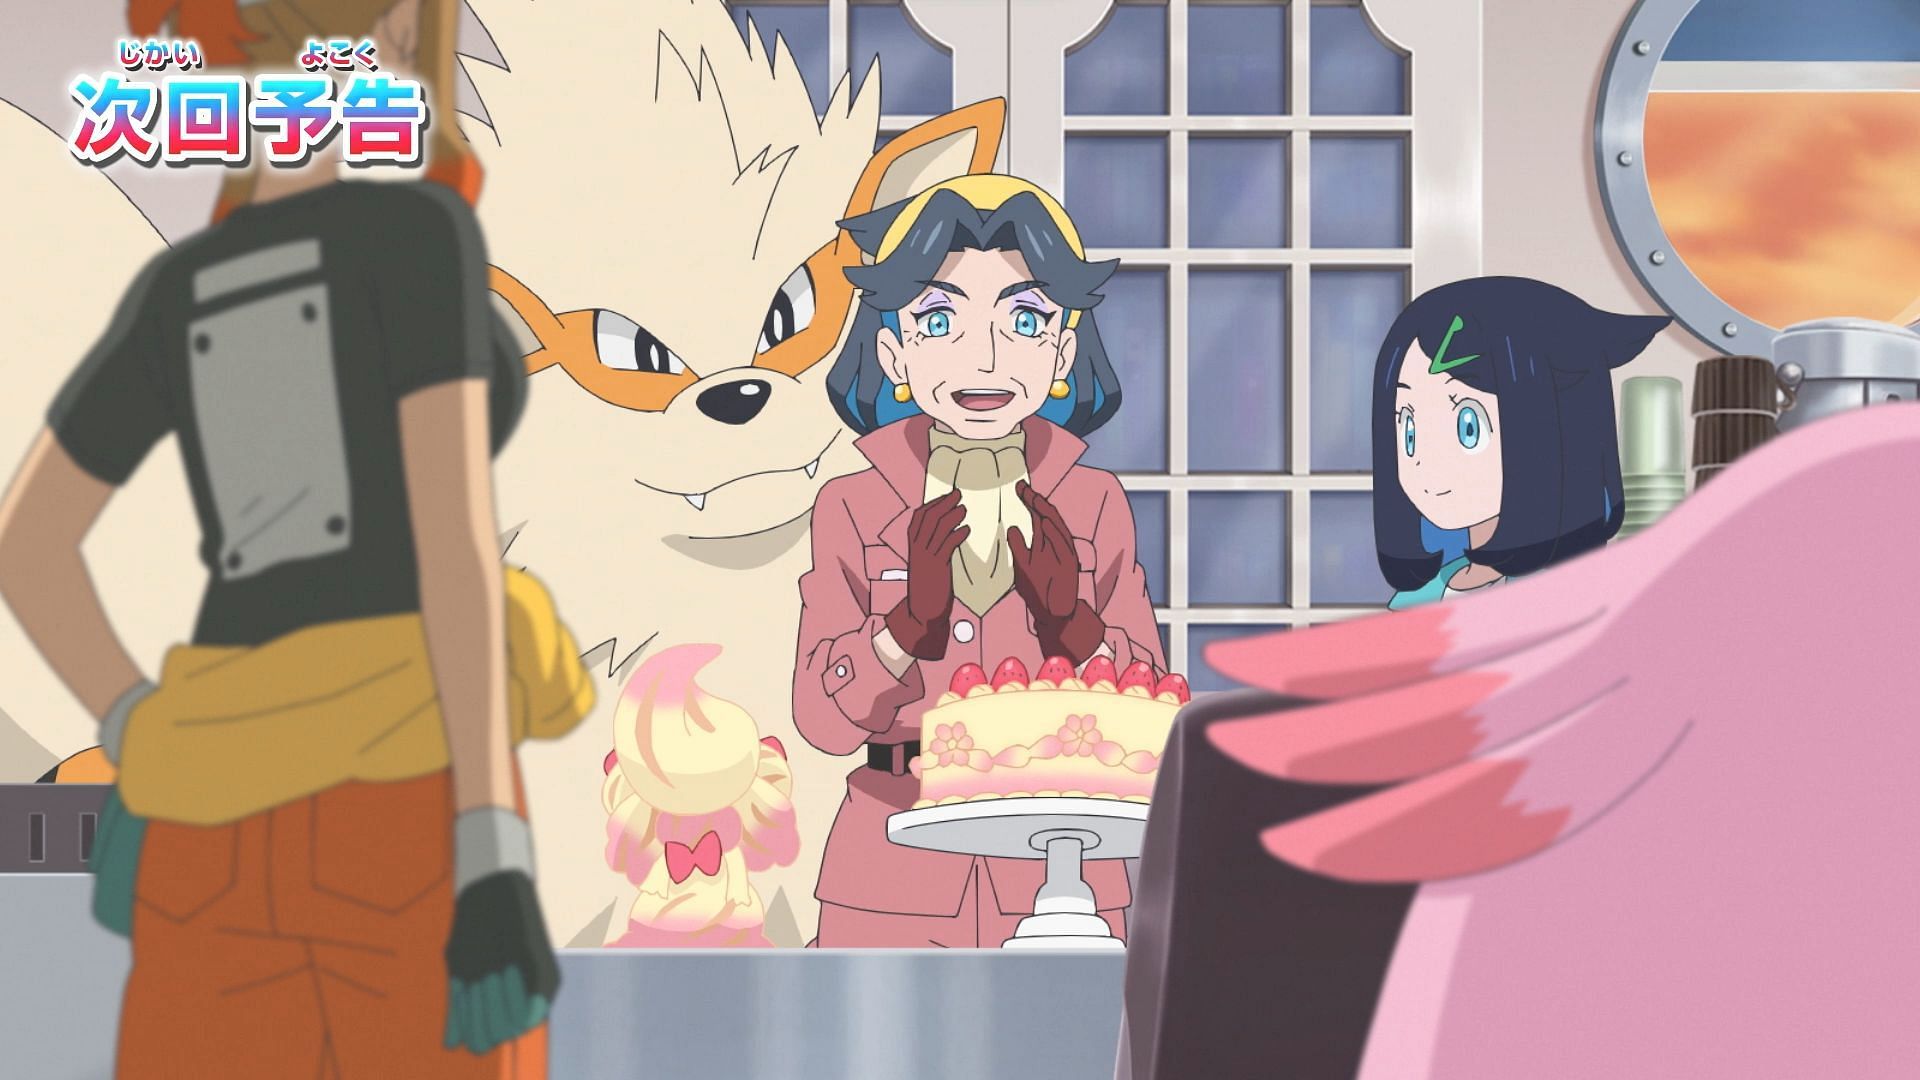 A farewell party seems to be thrown for Diana in Pokemon Horizons Episode 34.